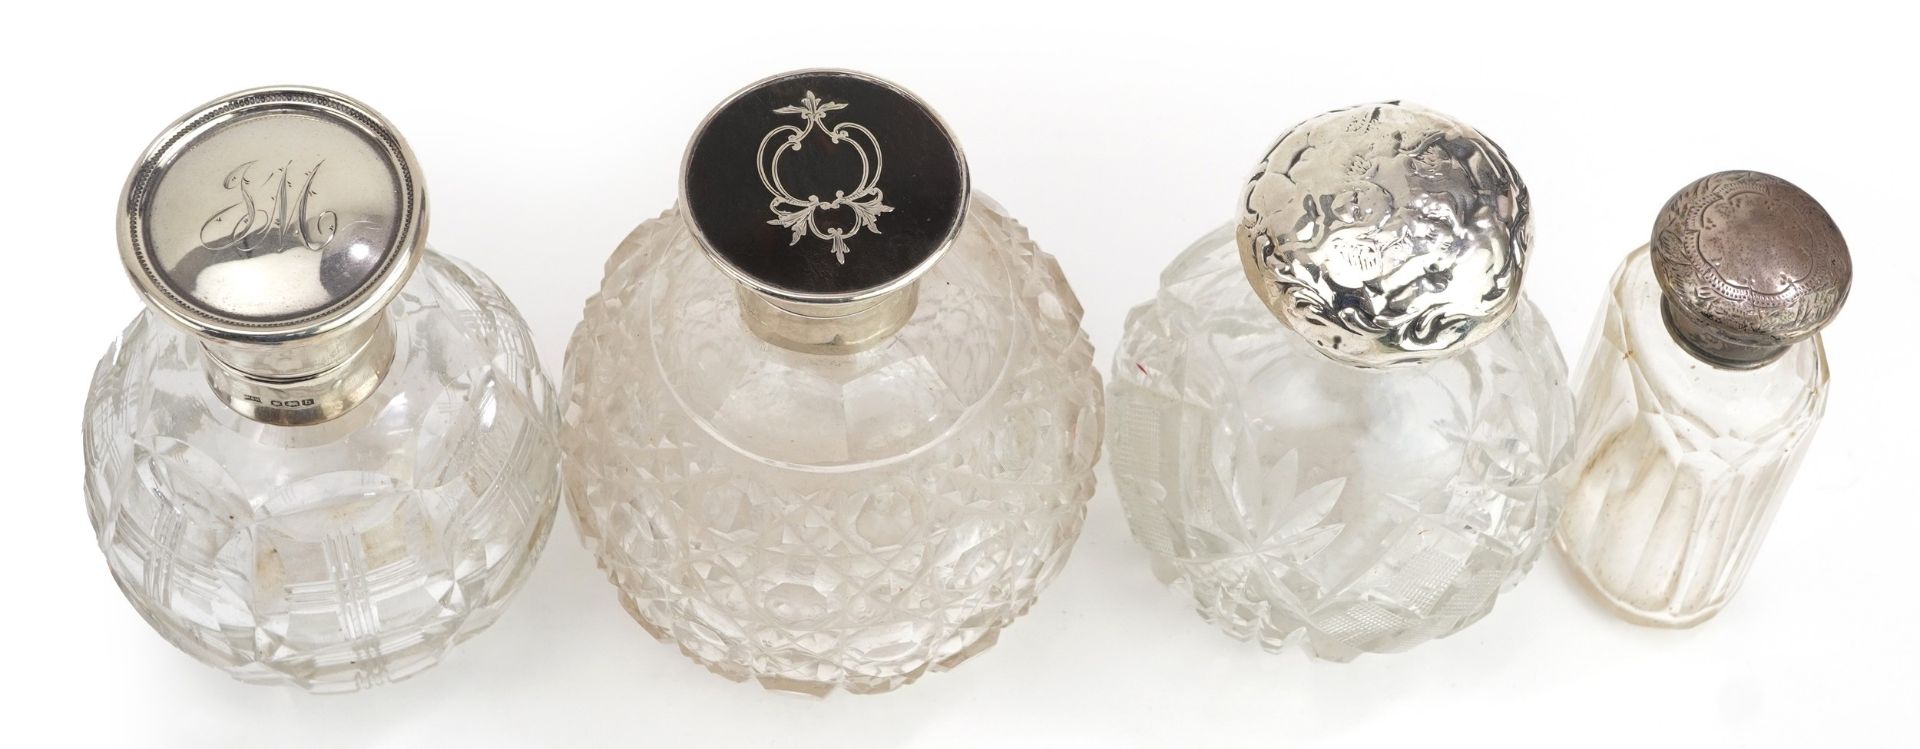 Victorian and later silver mounted cut glass sent bottles, one with tortoiseshell pique work lid, - Image 2 of 5